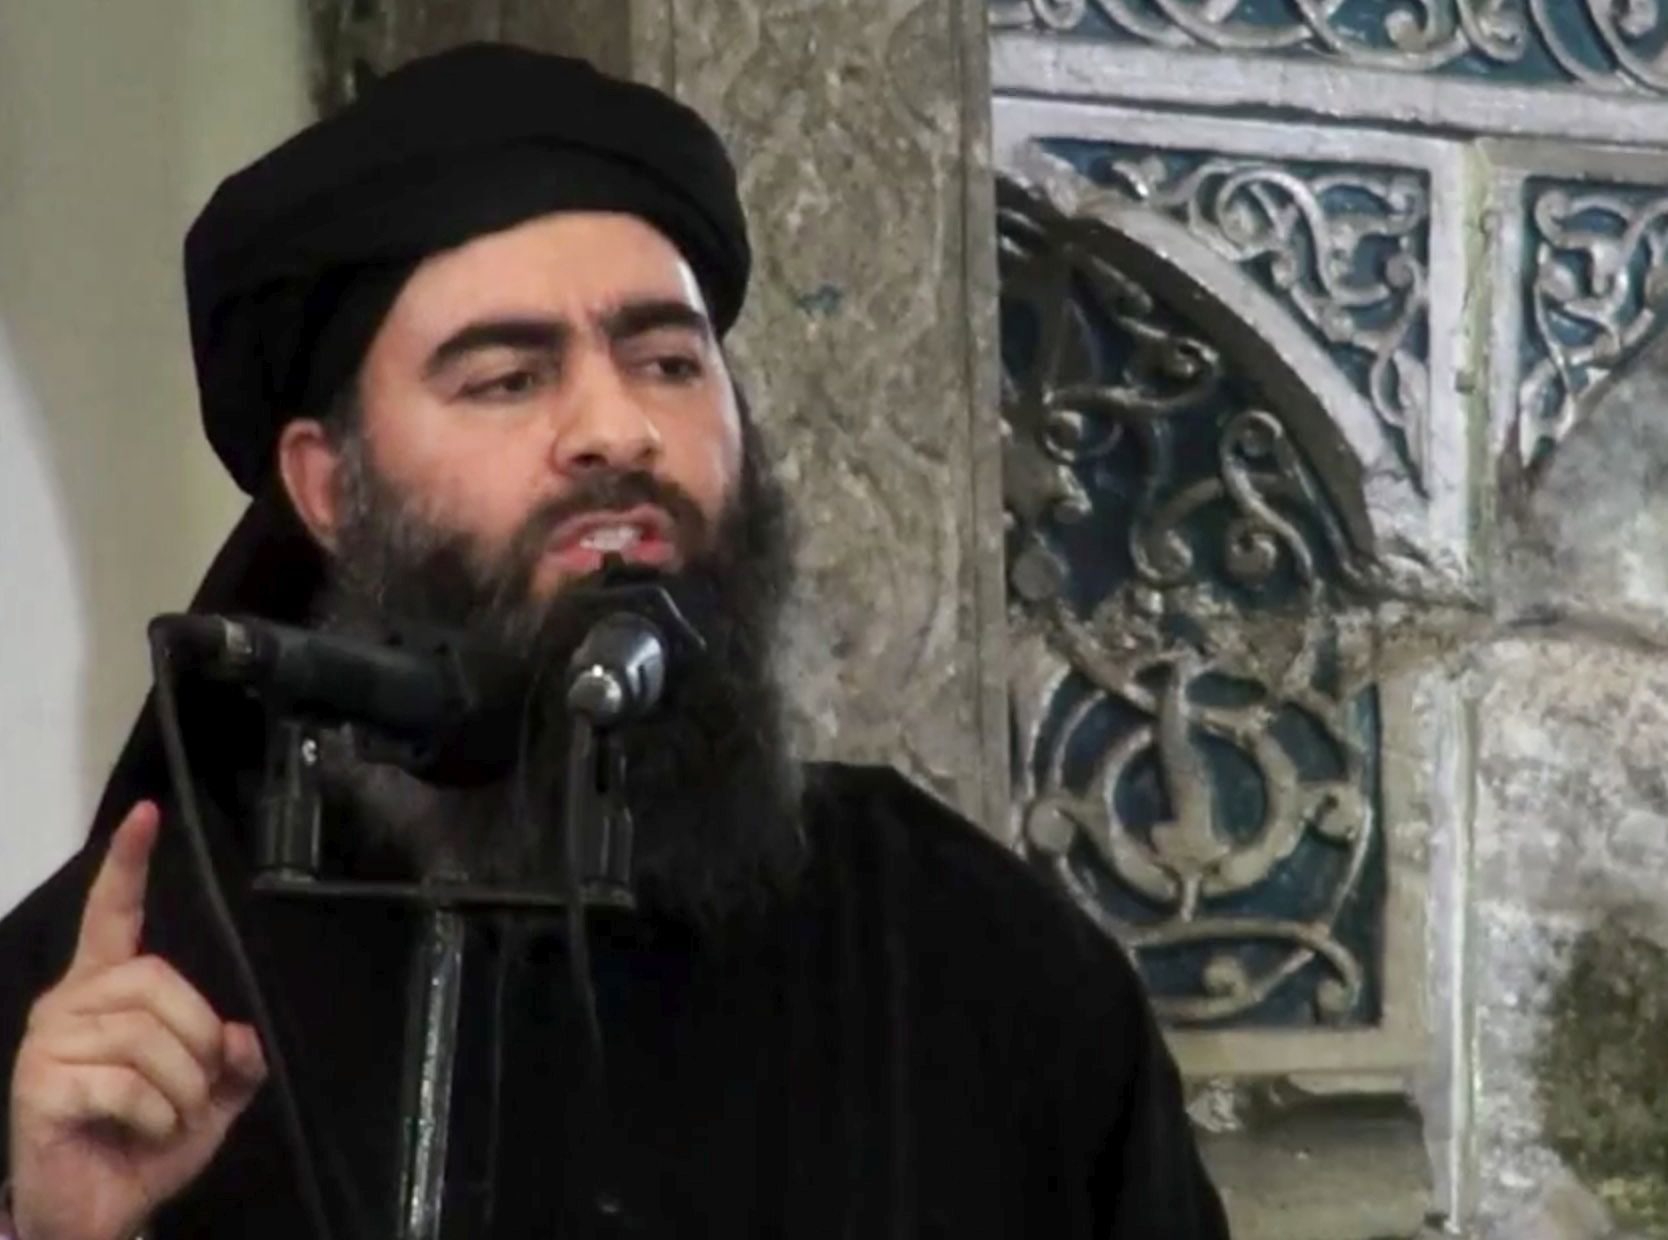 FILE - This file image made from video posted on a militant website July 5, 2014, purports to show the leader of the Islamic State group, Abu Bakr al-Baghdadi, delivering a sermon at a mosque in Iraq during his first public appearance. Islamic State group leader Abu Bakr al-Baghdadi appears to be still alive, a top U.S. military commander said Thursday, Aug. 31, 2017, contradicting RussiaÄôs claims that it probably killed the top counterterror target months ago.(Militant video via AP, File) UNITED STATES ISLAMIC STATE